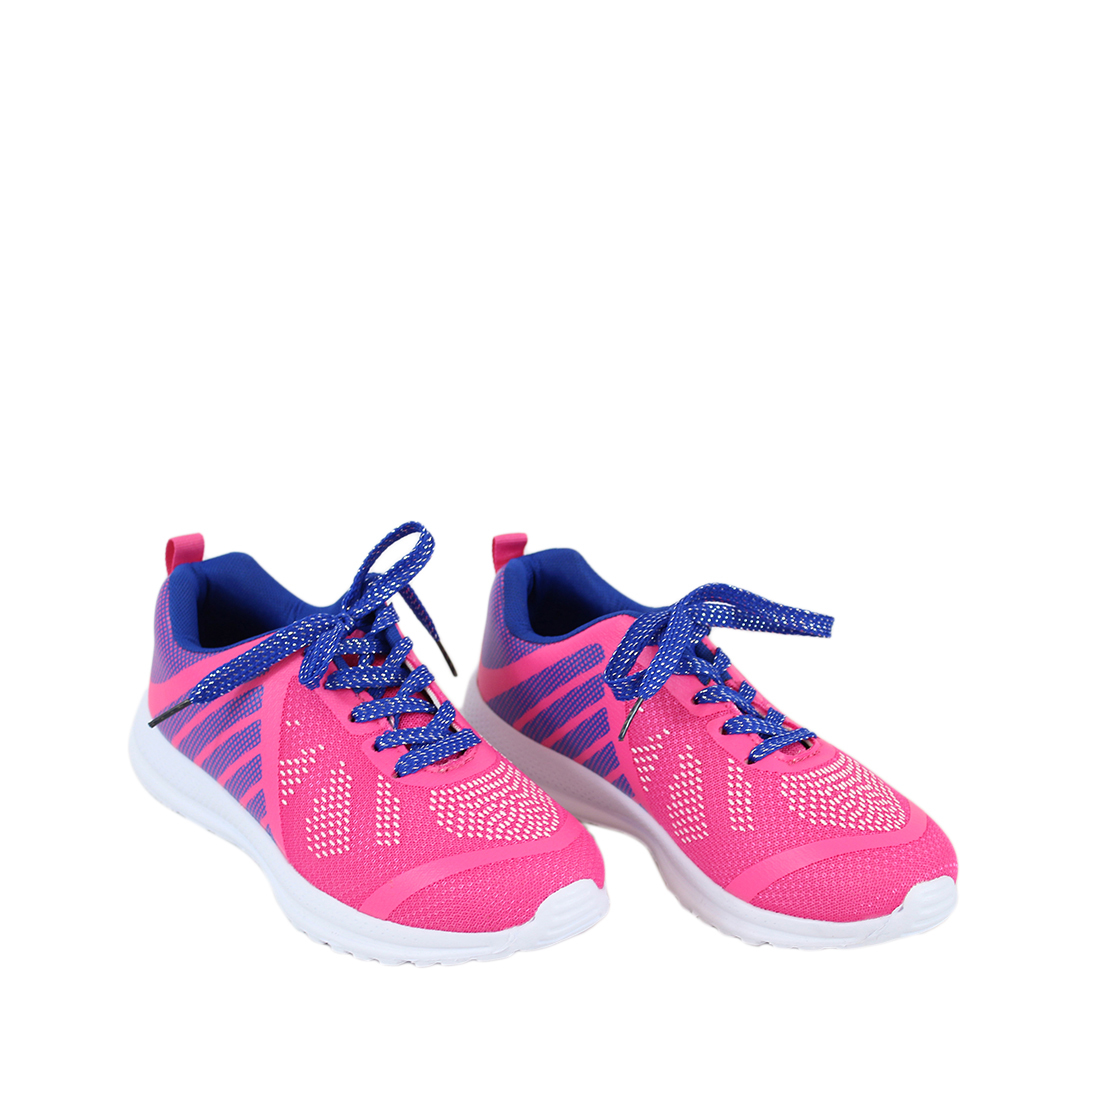 Super light trainers with happy colours